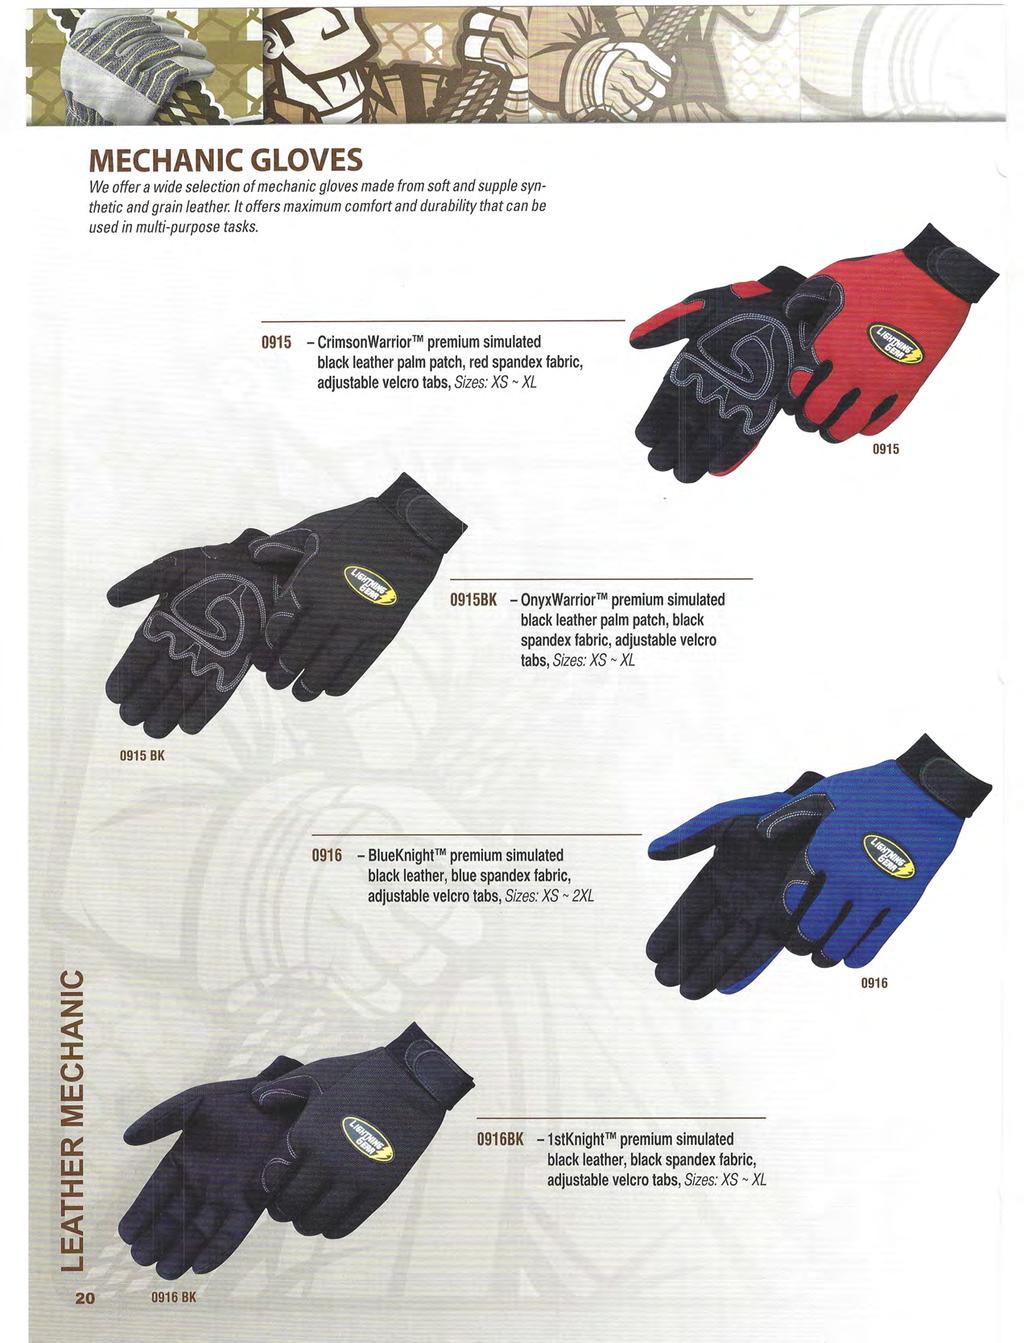 MECHANIC GLOVES We offer a wide selection of mechanic gloves made from soft and supple synthetic and grain leather. It offers maximum comfort and durability that can be used in multi-purpose tasks.